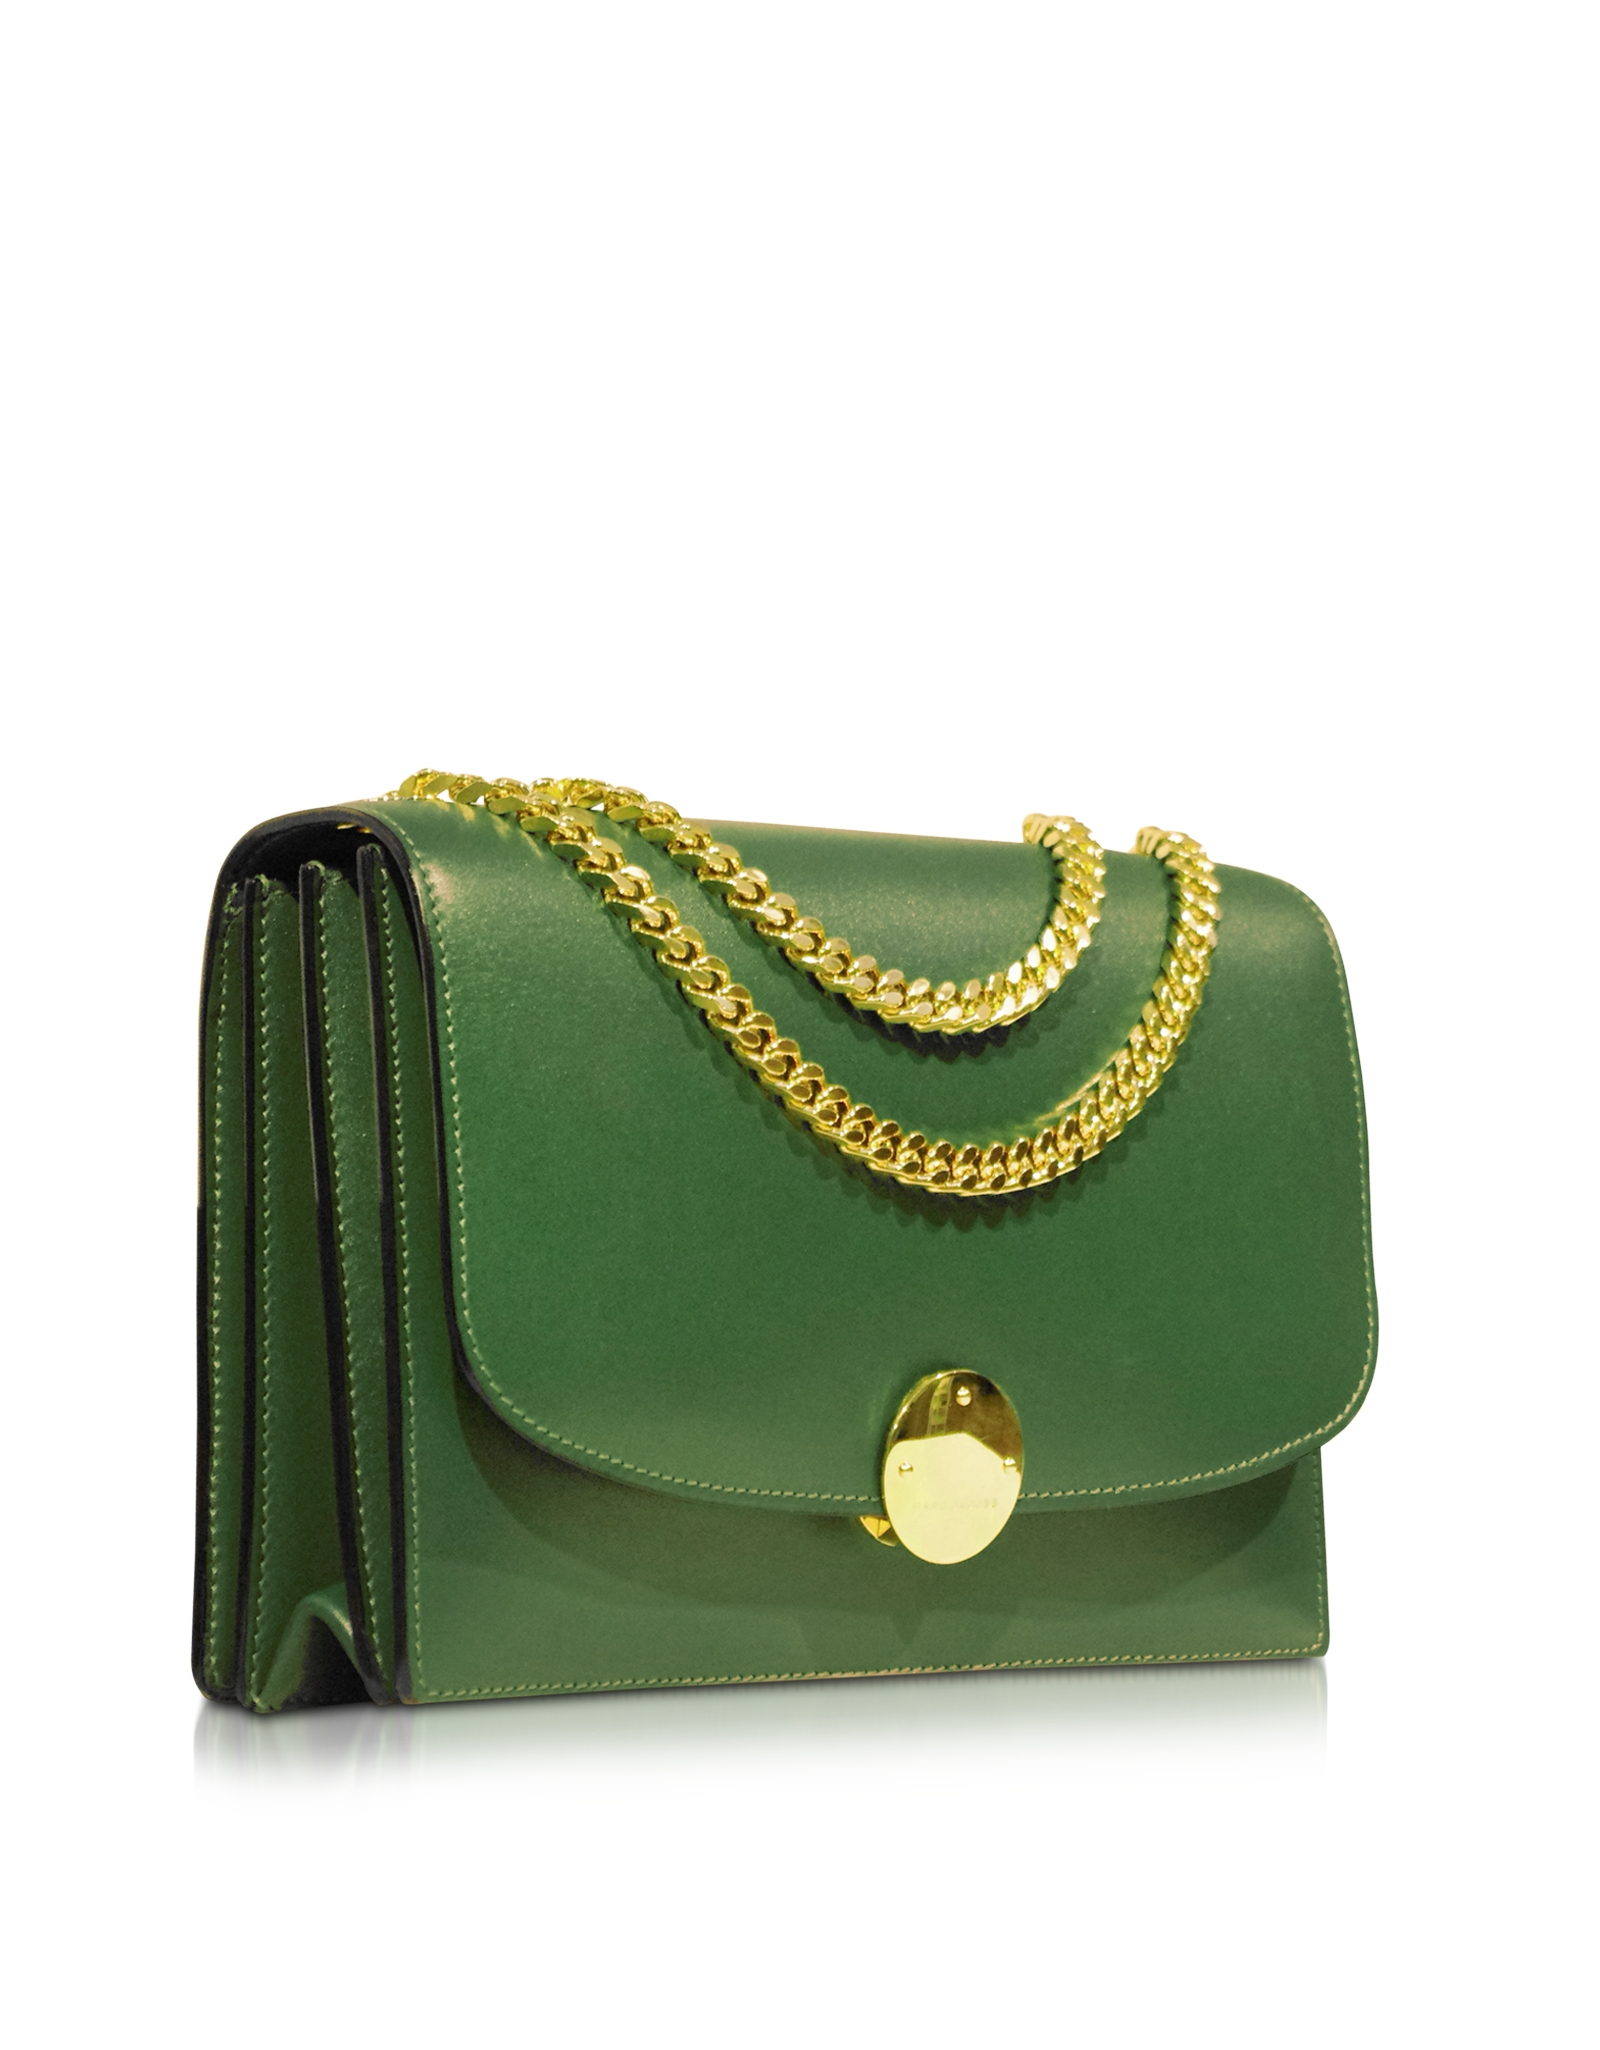 Lyst - Marc Jacobs Box Calf Trouble Bottle Green Shoulder Bag in Green